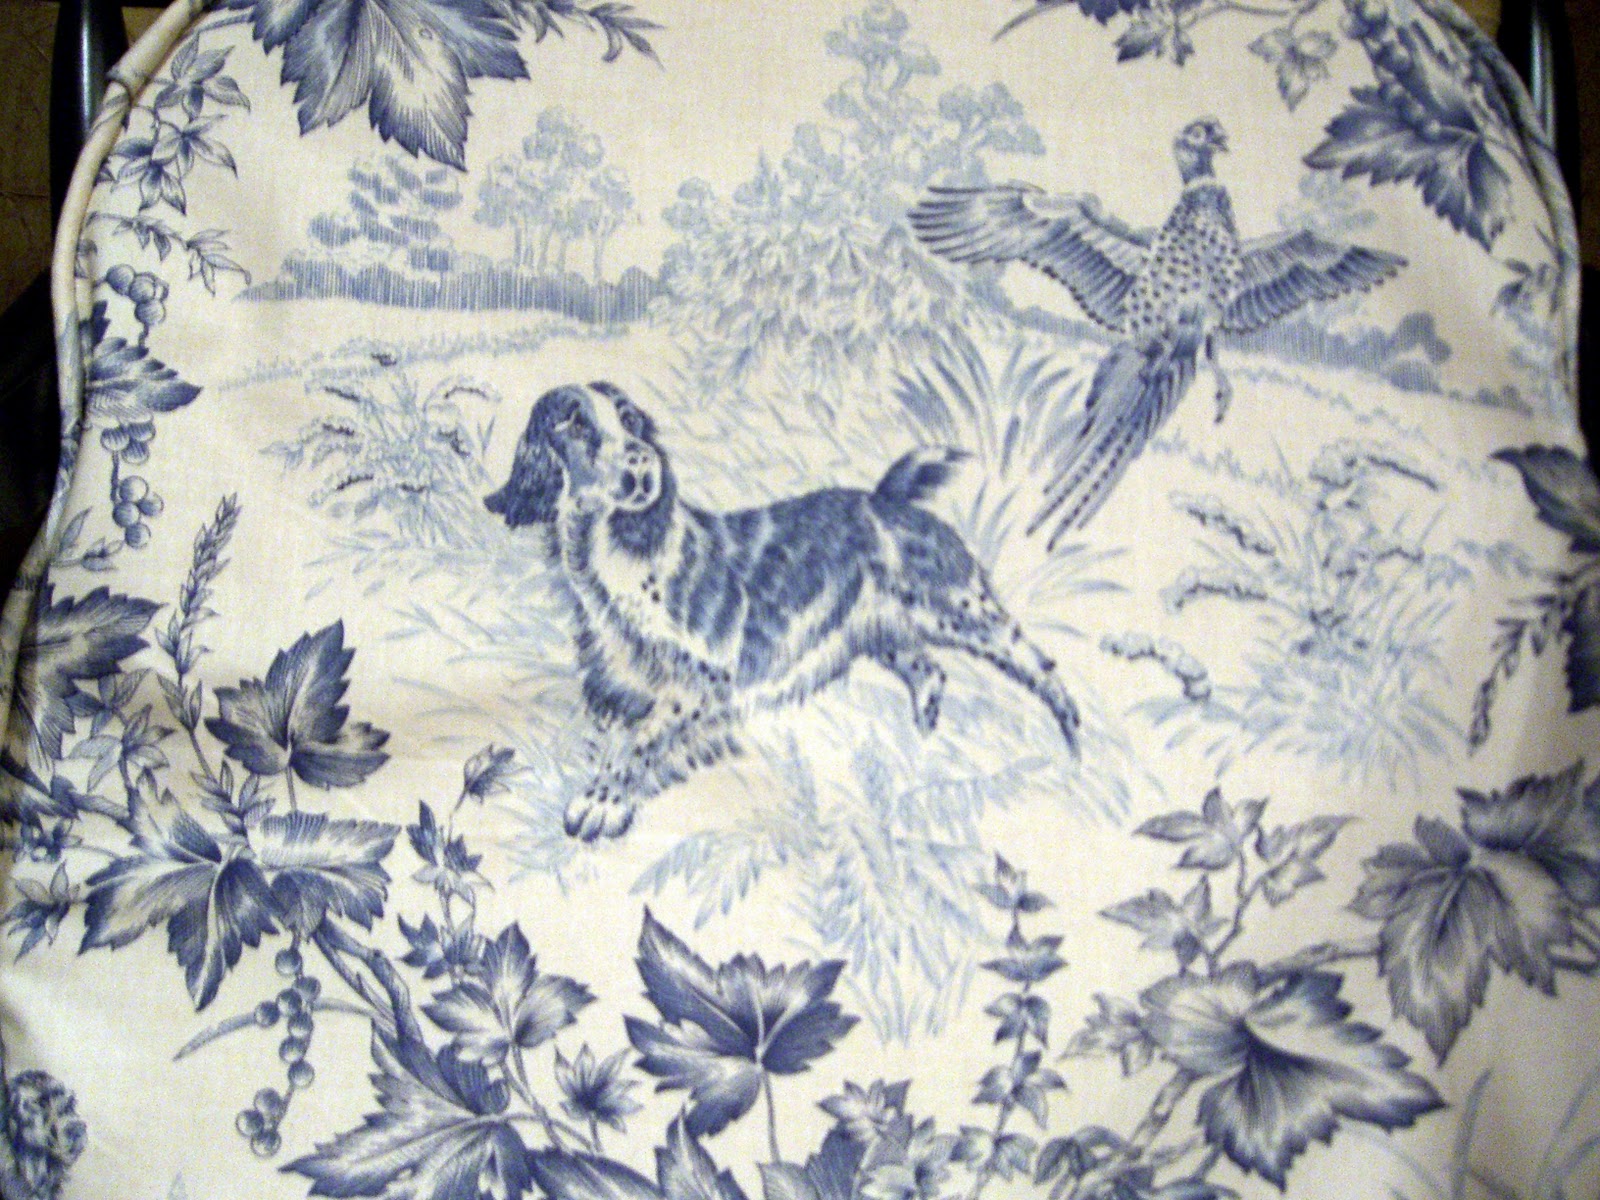 Toile Tale August